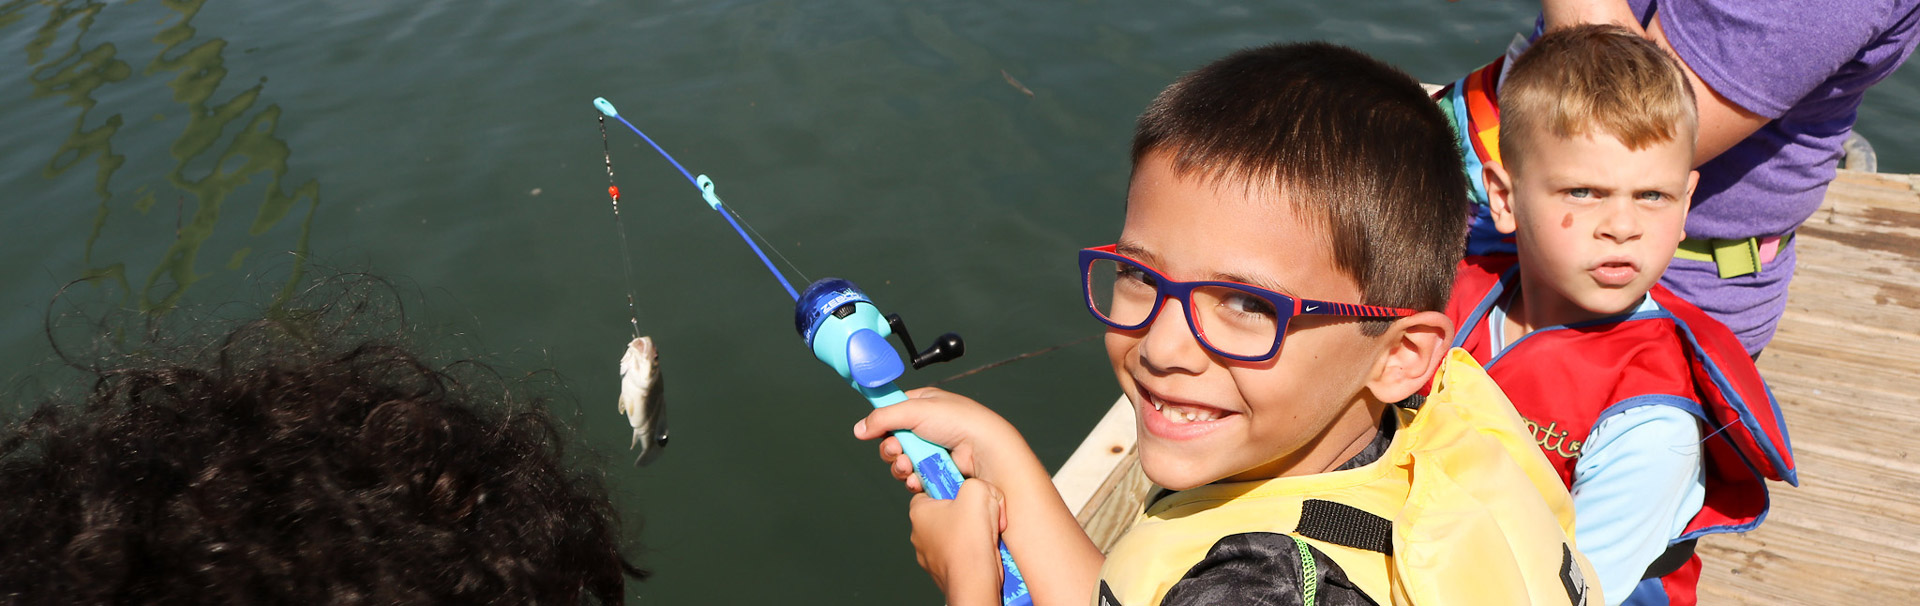 Kid holding a fishing rod with a fish on the line